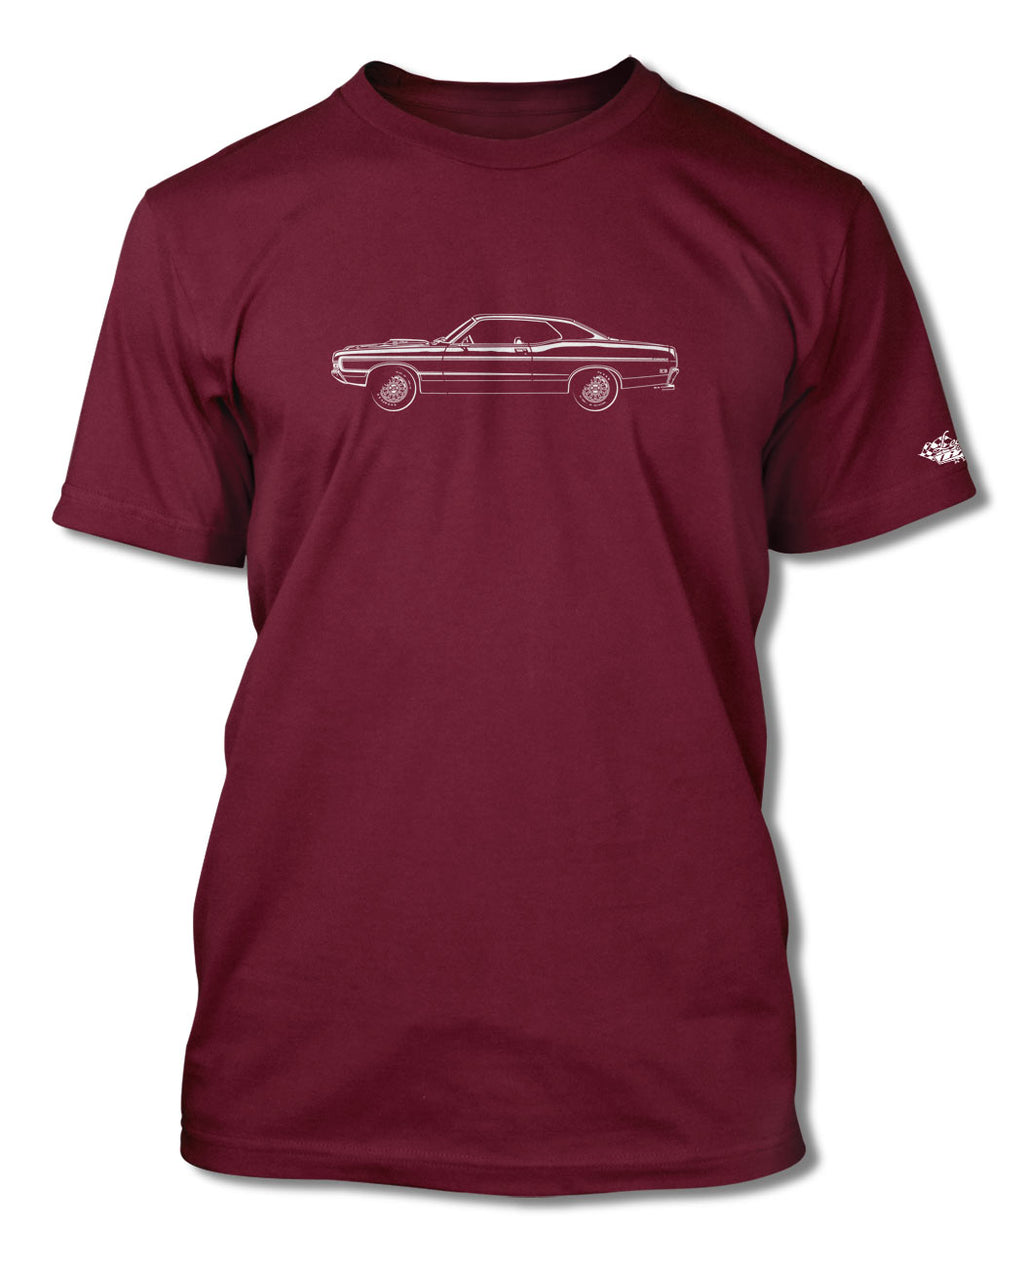 1969 Ford Torino GT Hardtop with Stripes T-Shirt - Men - Side View